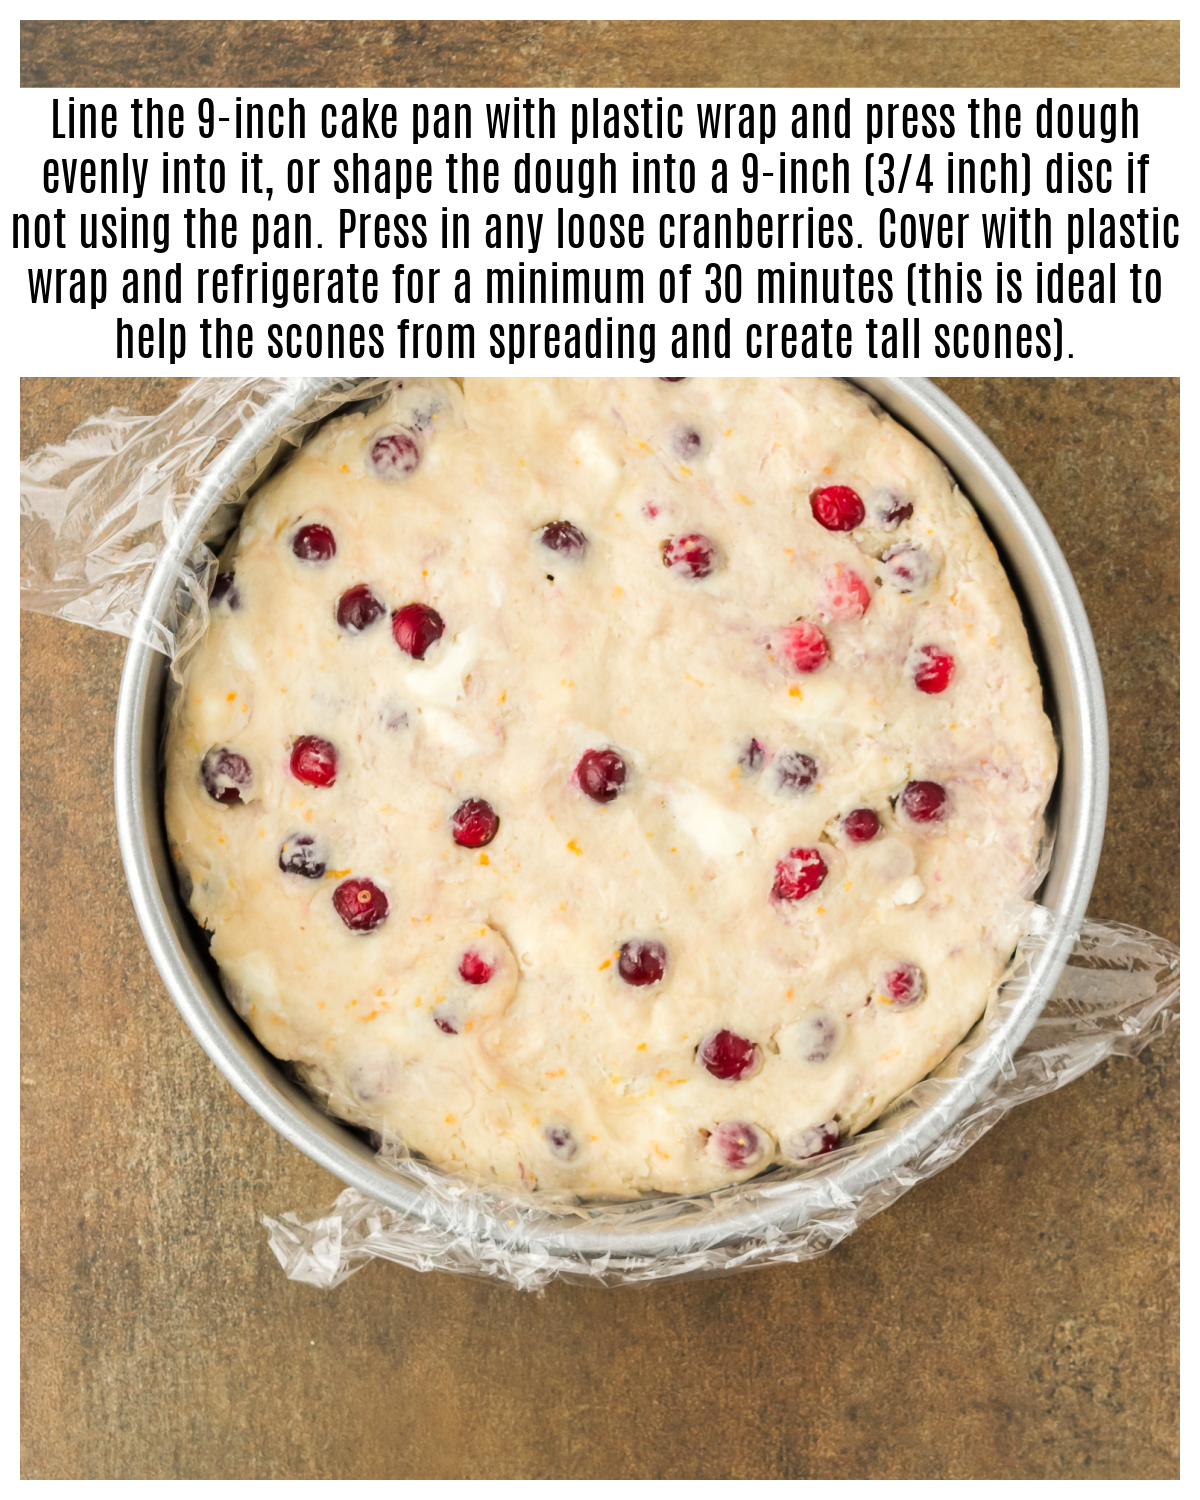 cranberry orange scone dough pressed into cake pan lined with plastic wrap